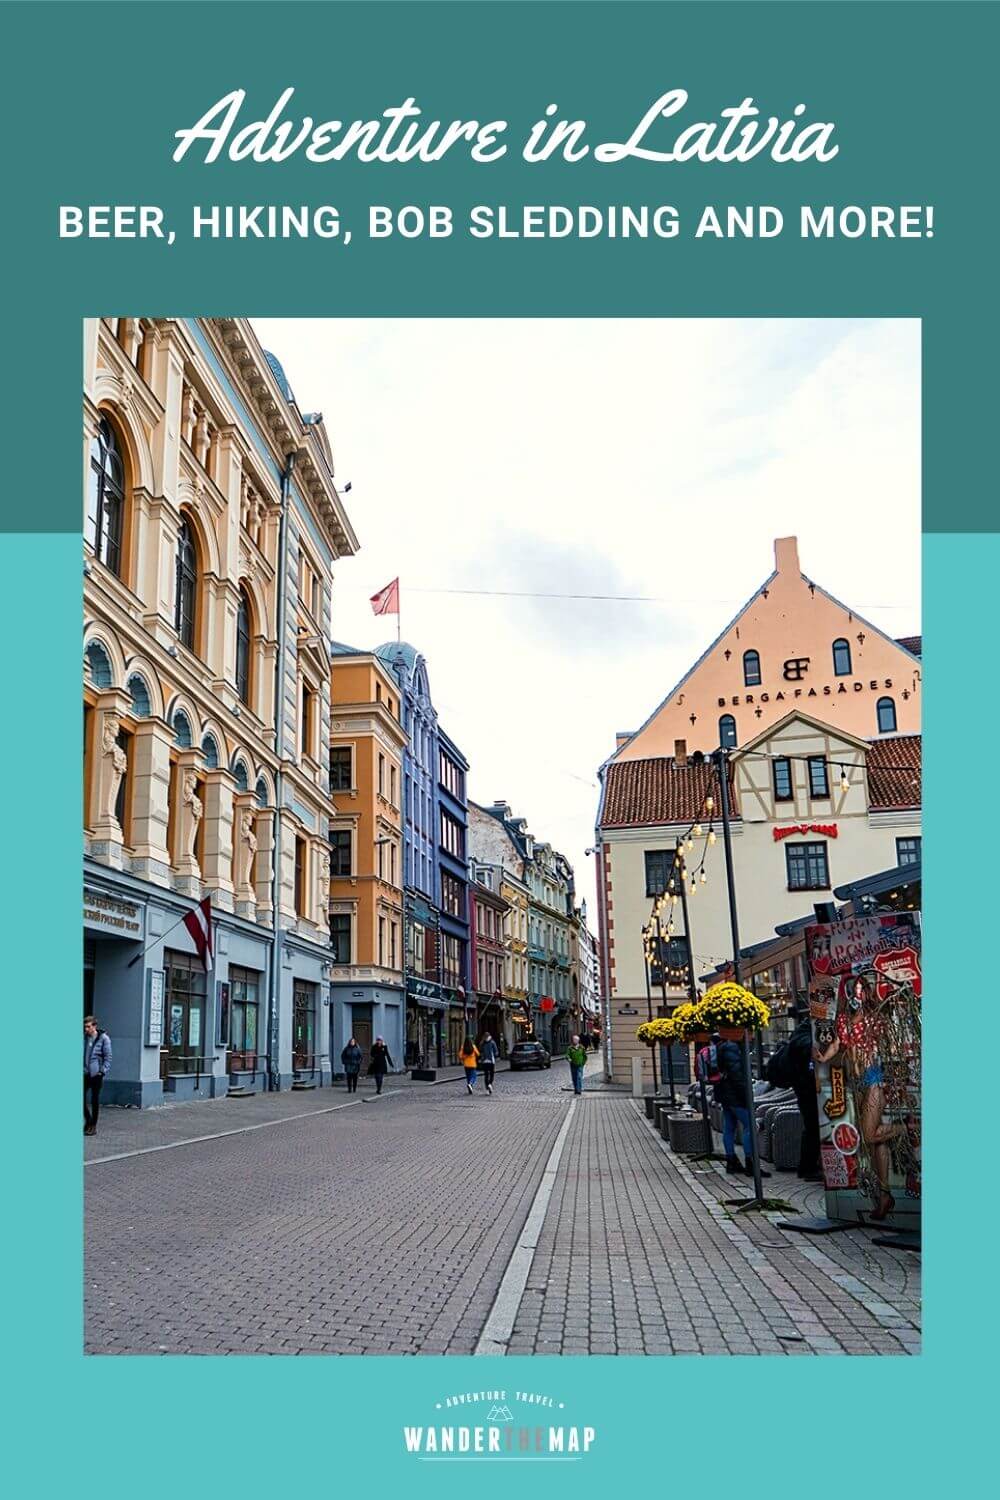 11+ Adventures in Latvia: Riga and Beyond